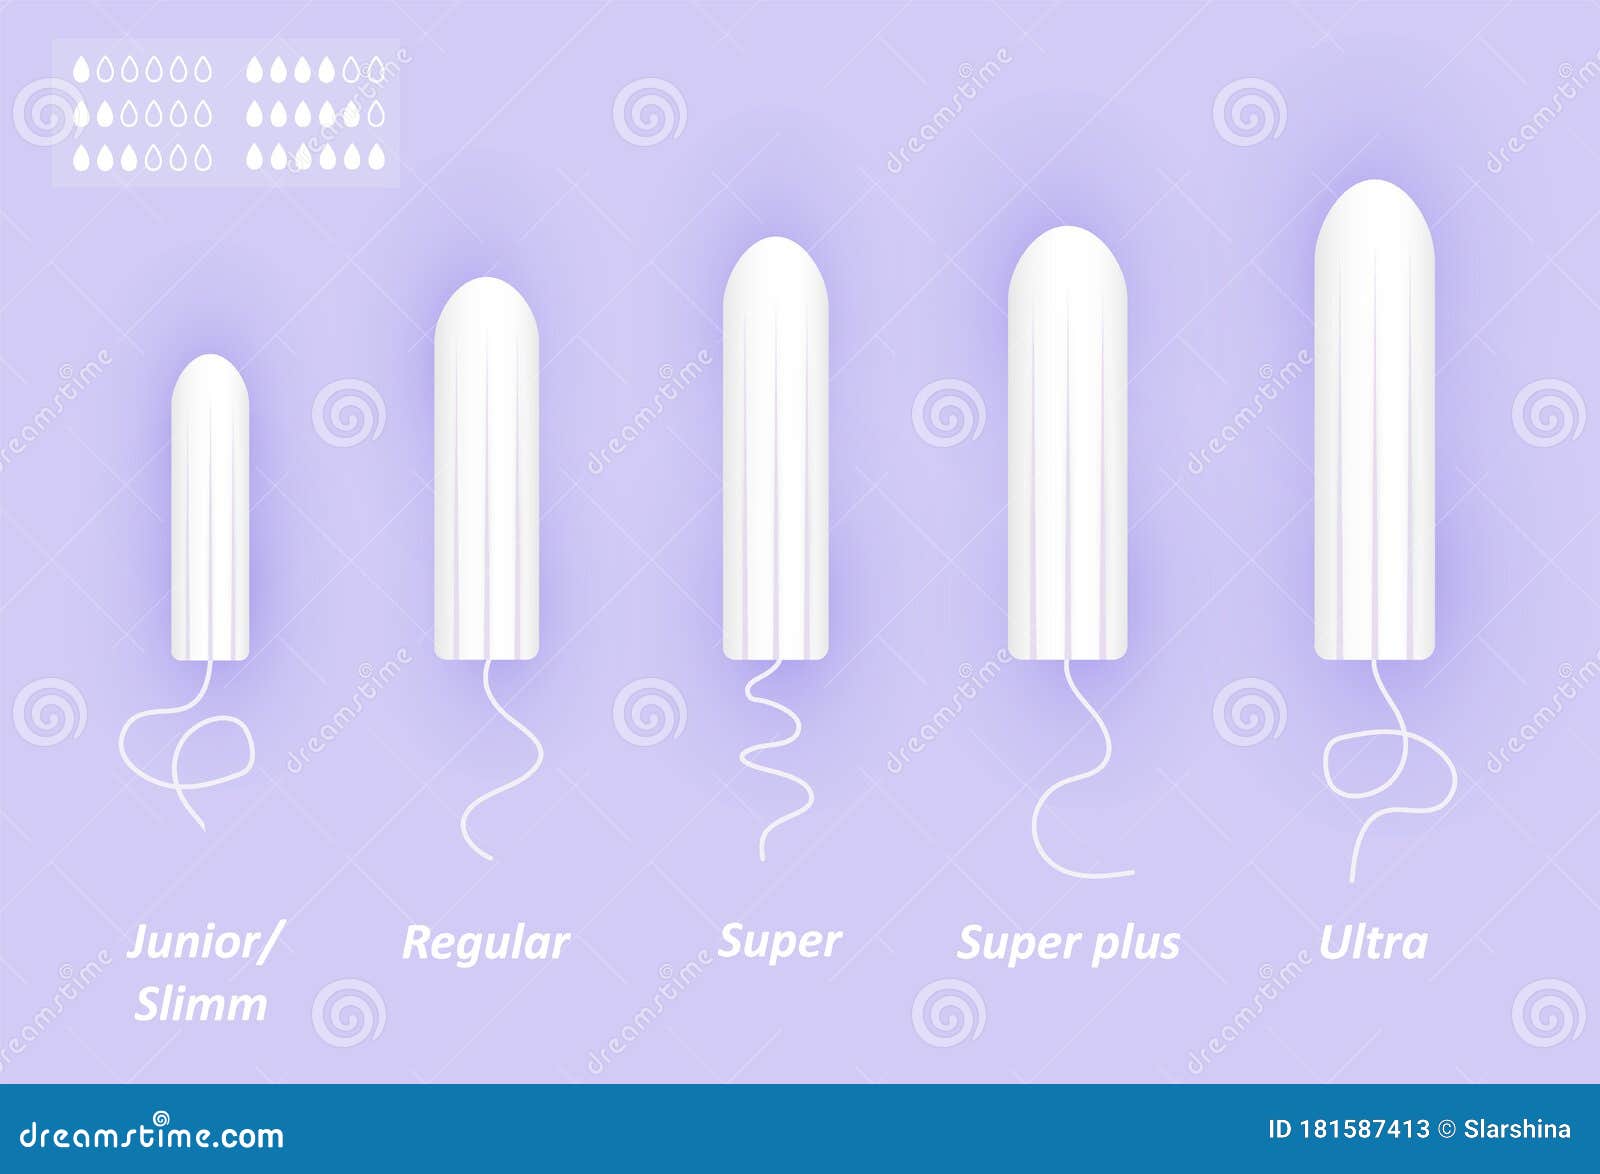 tampons sizes